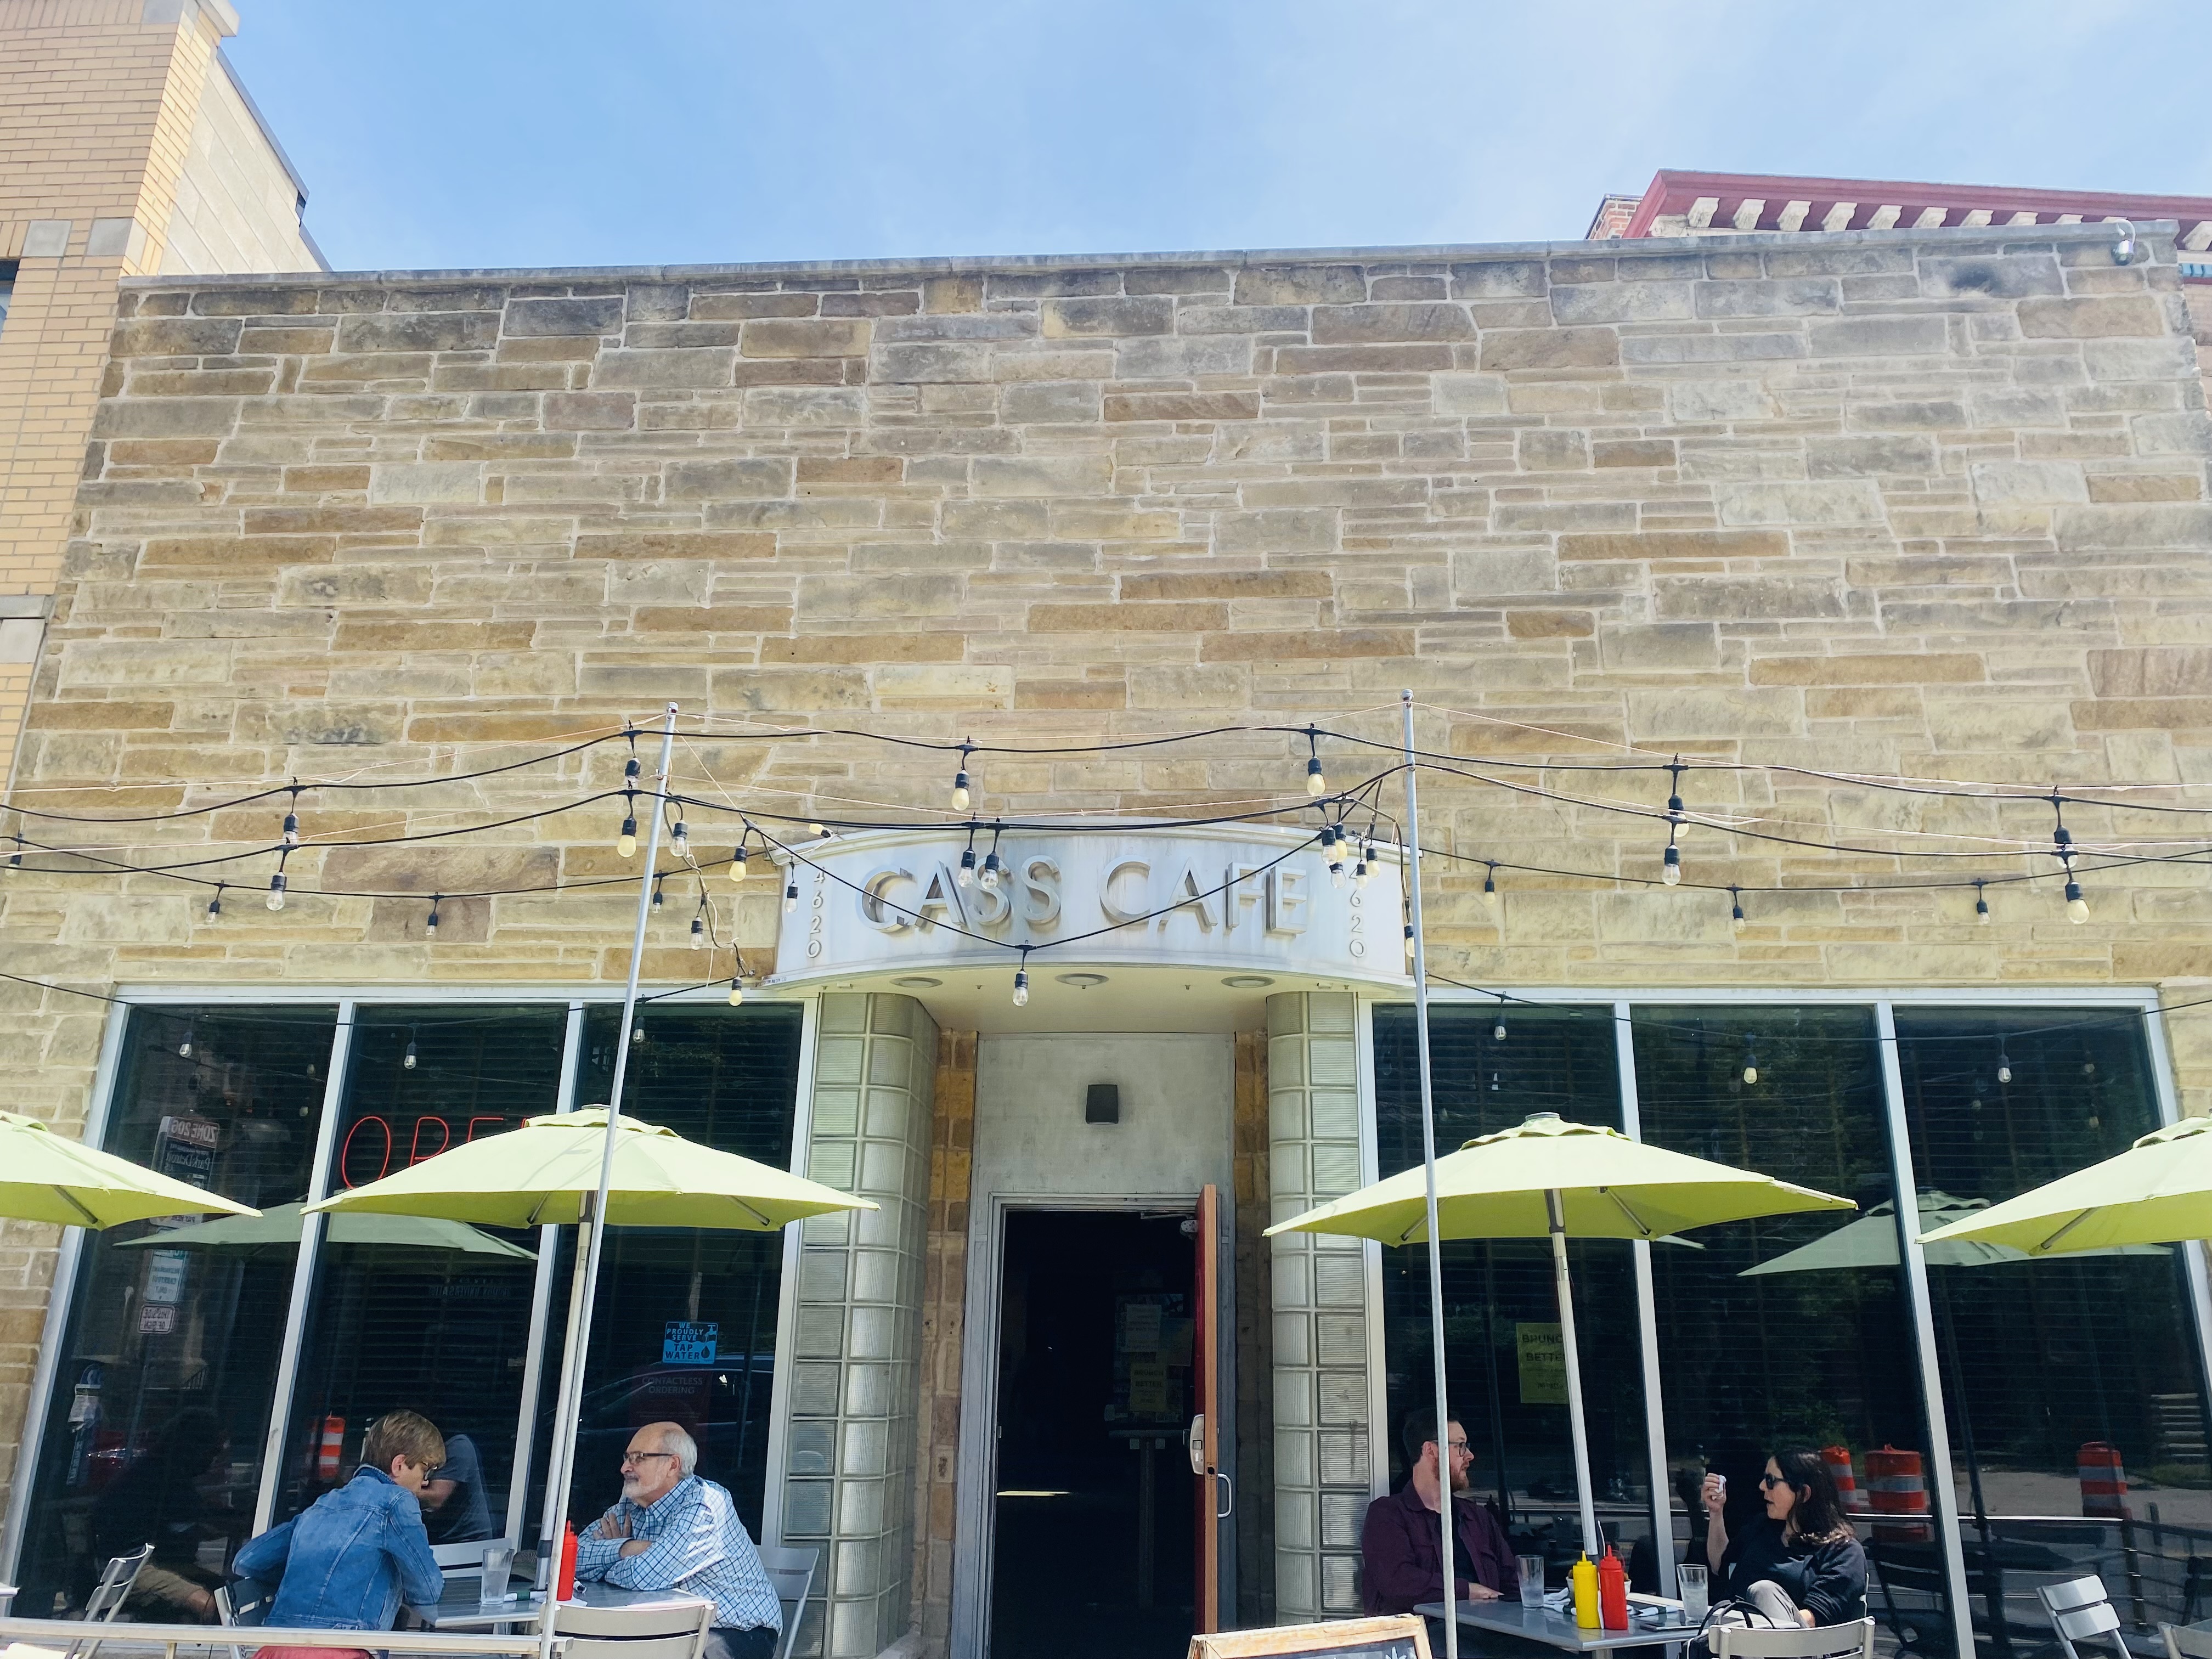 The stone exterior of a building with a metal sign that says Cass Cafe